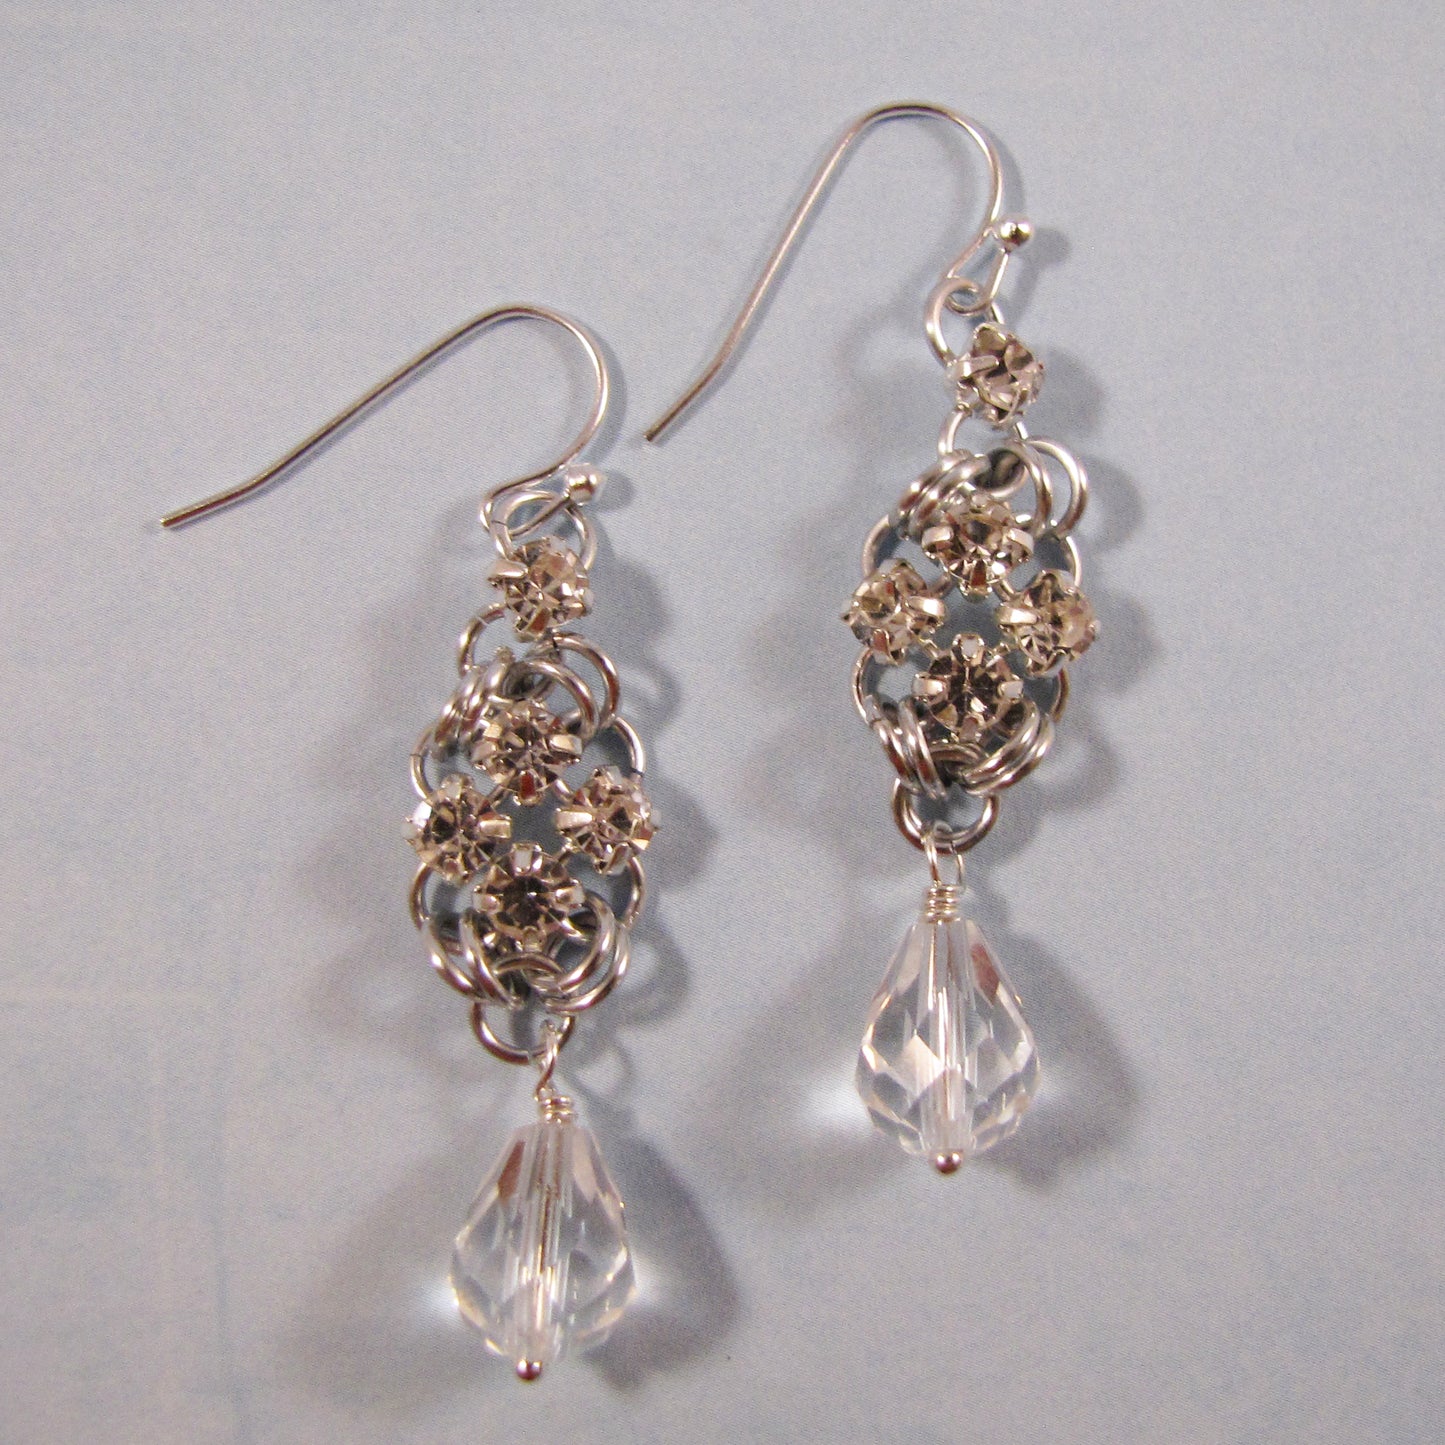 Simple Square Rhinestone Earrings Kit with Free Video Silver and Crystal